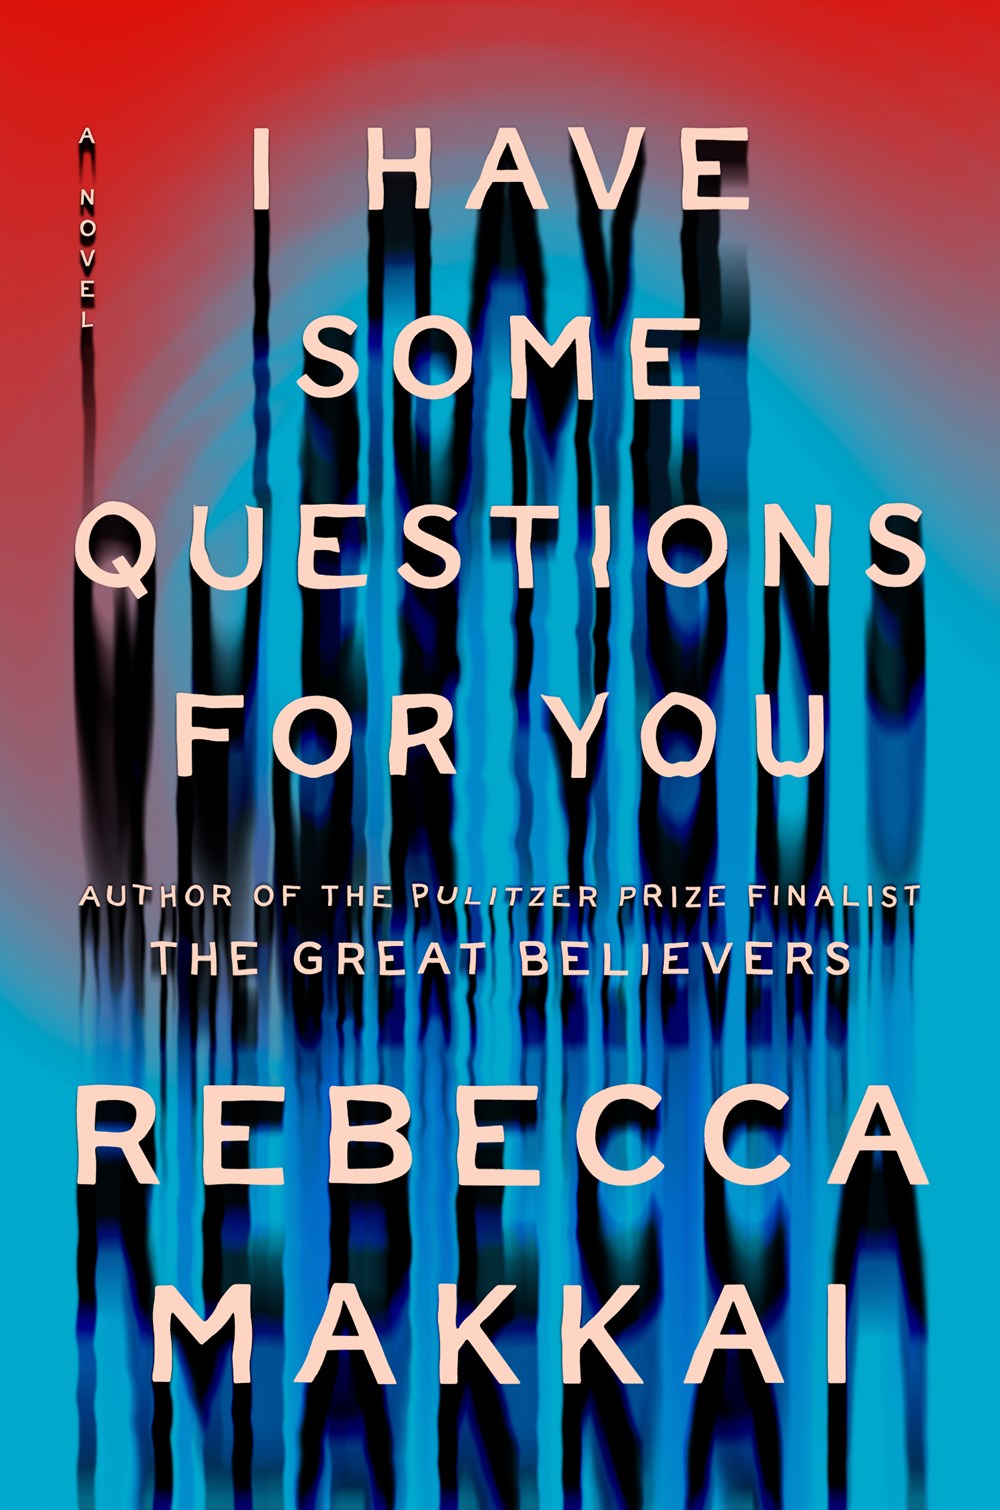 Read-Alikes for ‘I Have Some Questions for You’ by Rebecca Makkai | LibraryReads